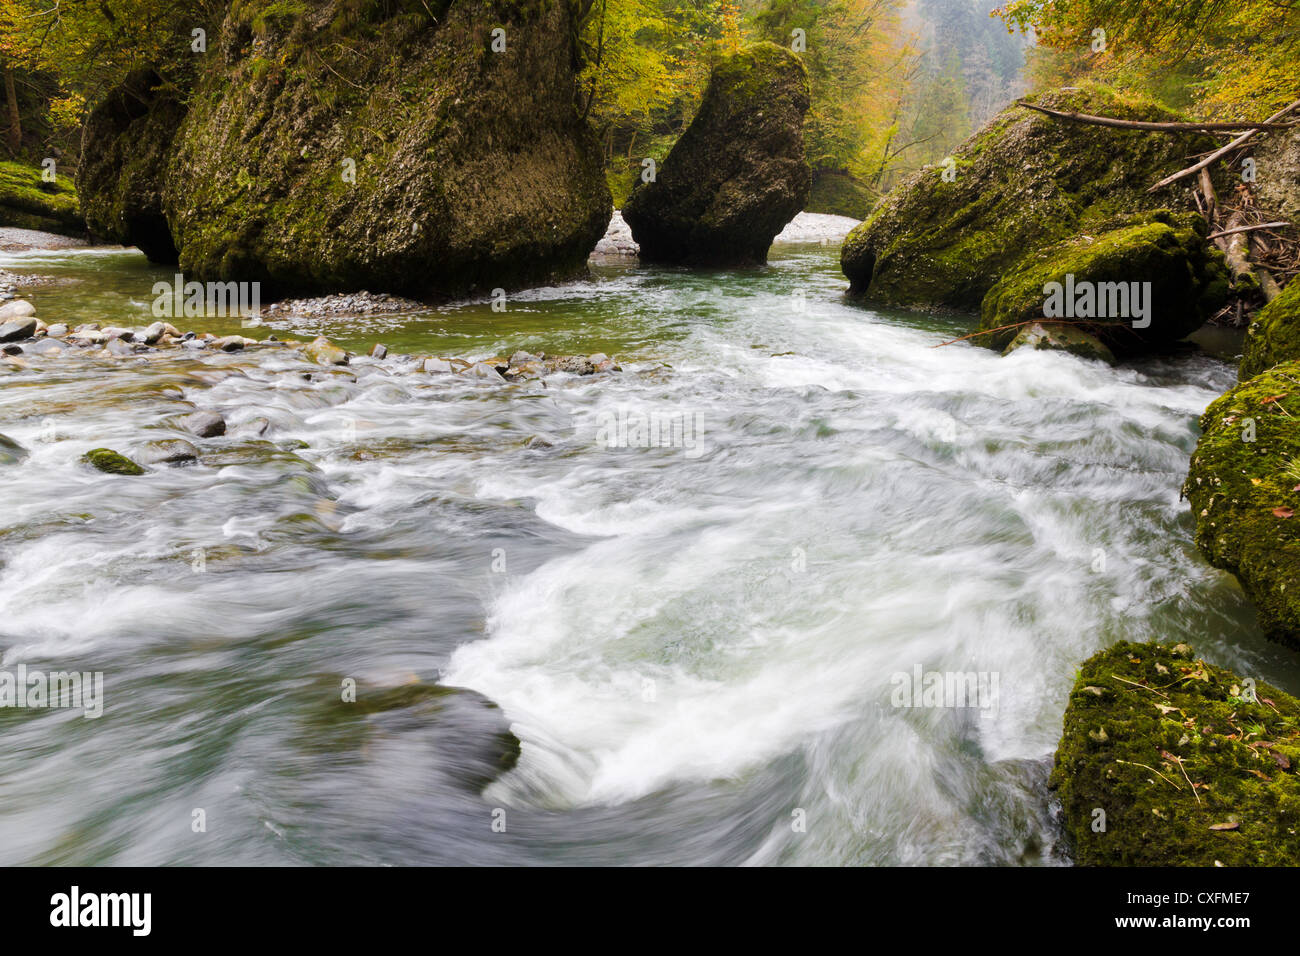 fresh. clean, clear, forest stream splash down over moss covered stones in autumn woods Stock Photo